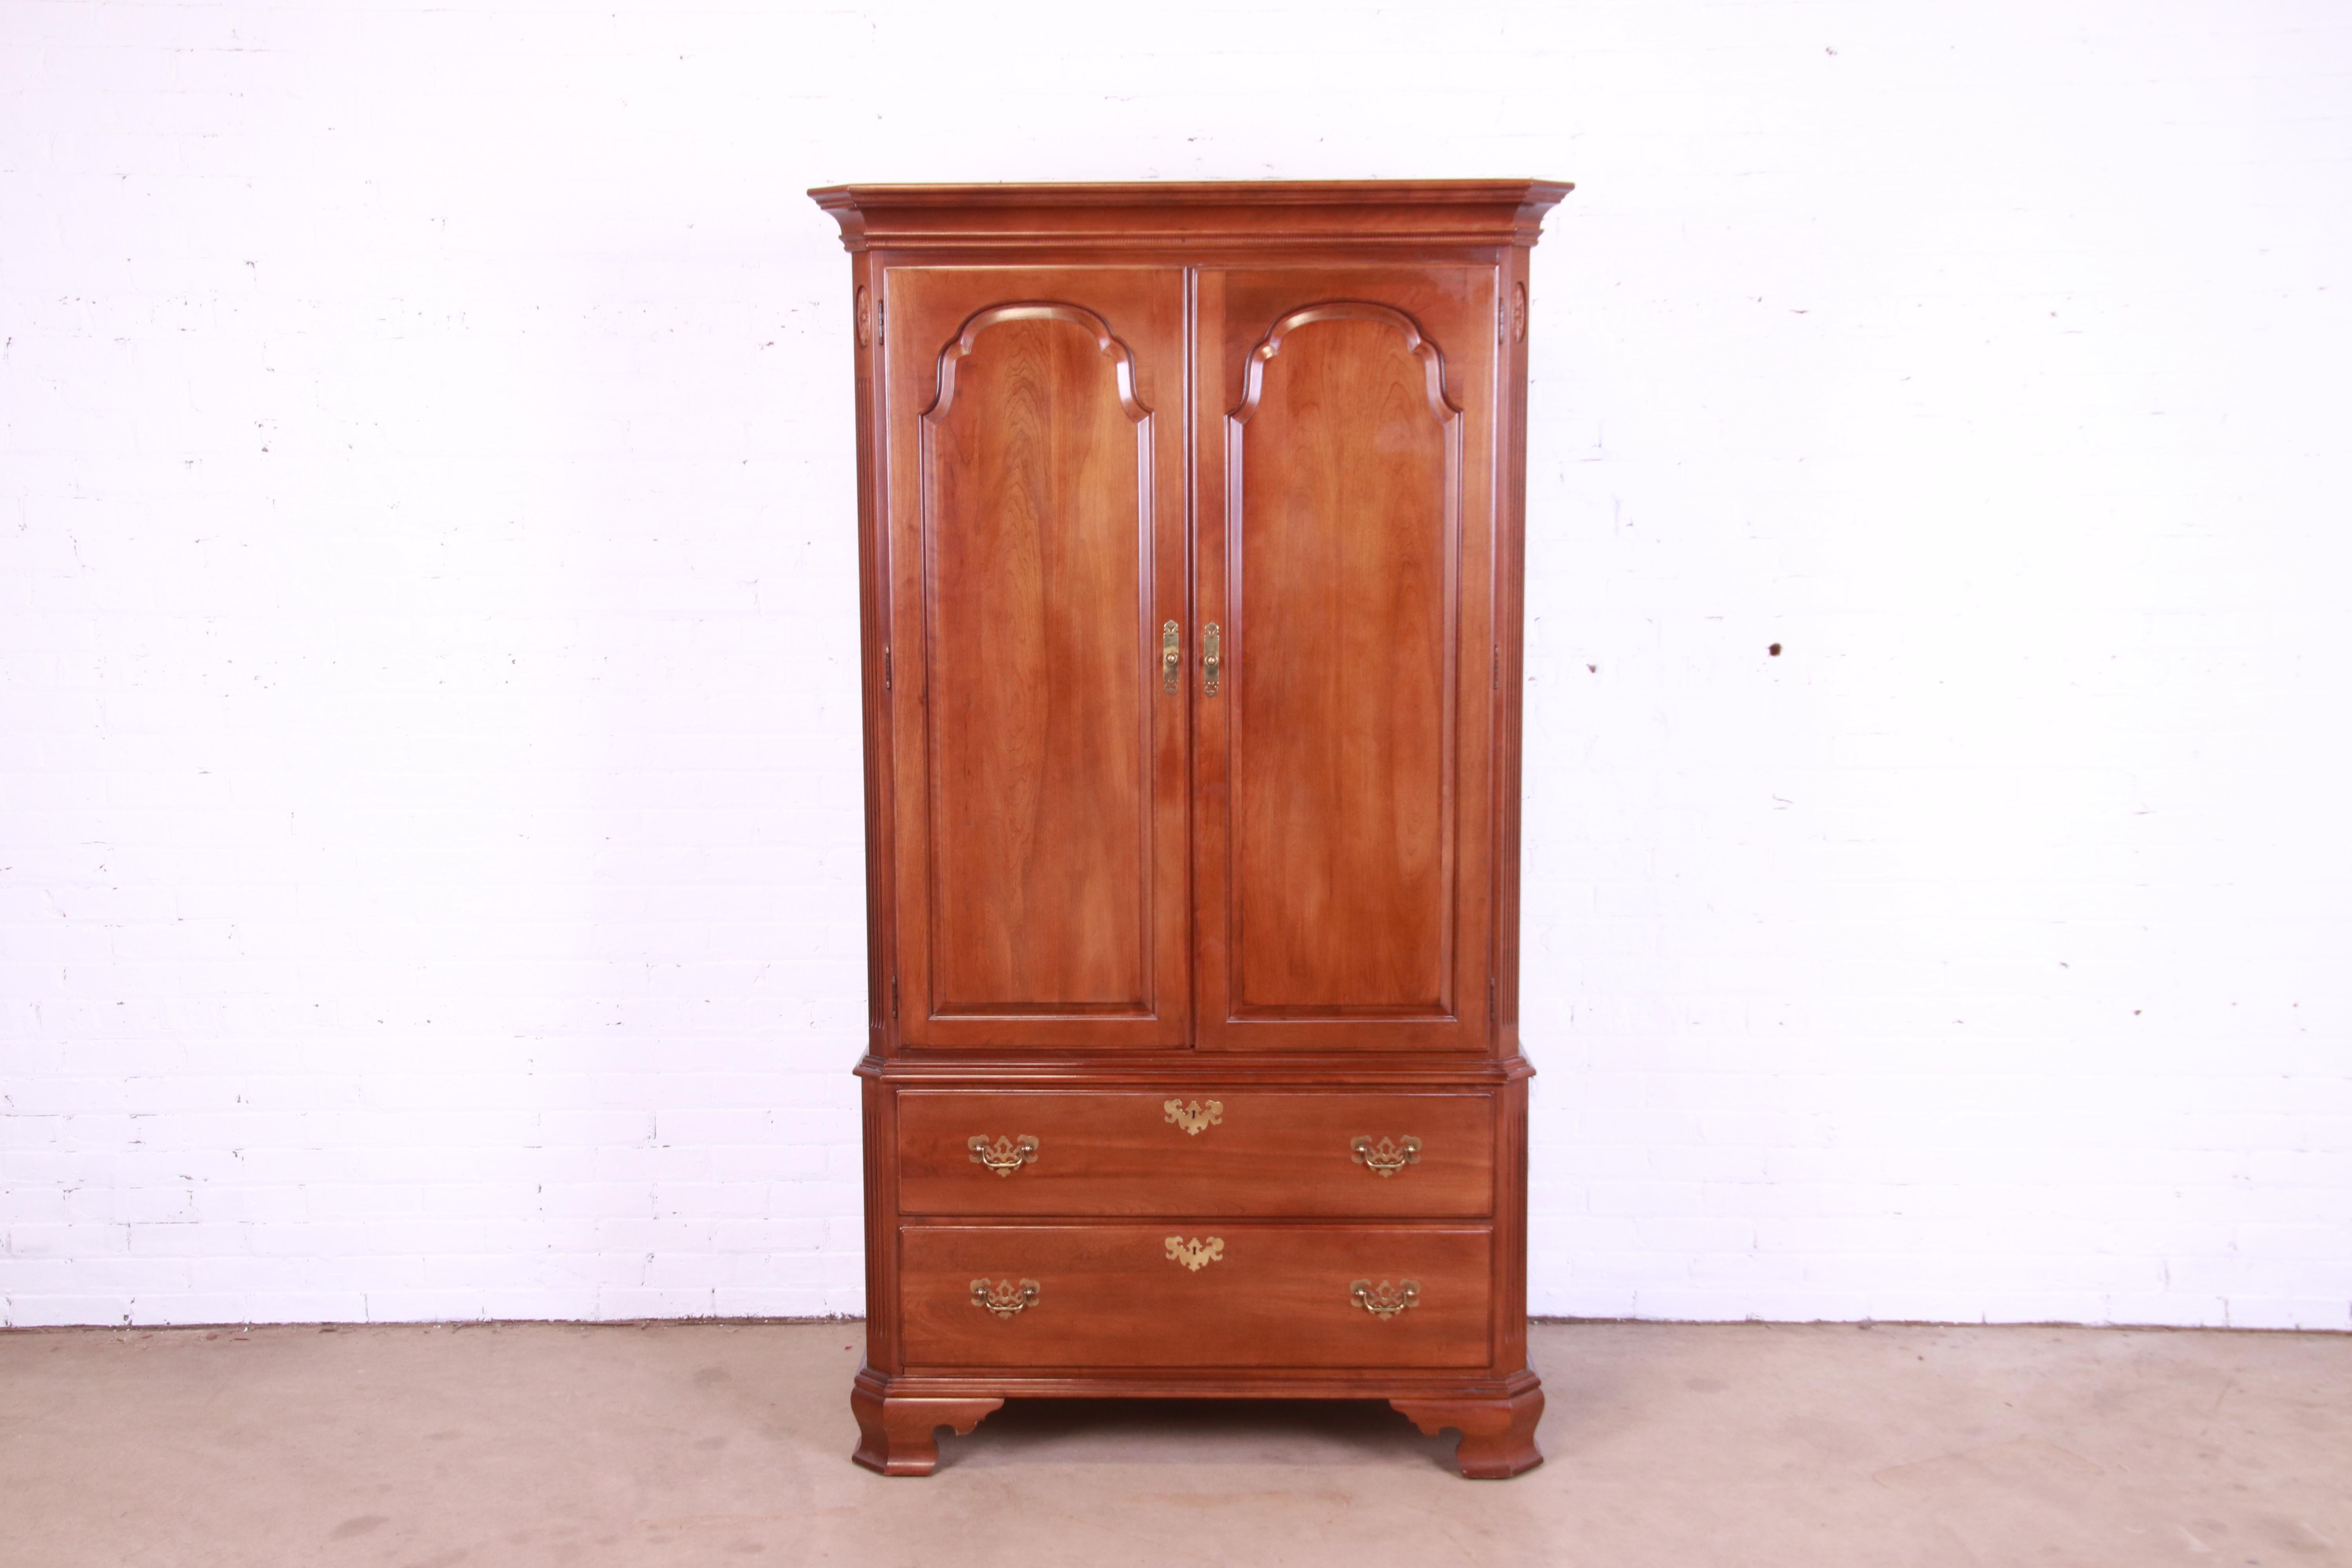 A gorgeous Georgian gentleman's chest, highboy, or armoire dresser

By Ethan Allen

USA, Circa 1980s

Carved solid cherry wood, with original brass hardware.

Measures: 44.75